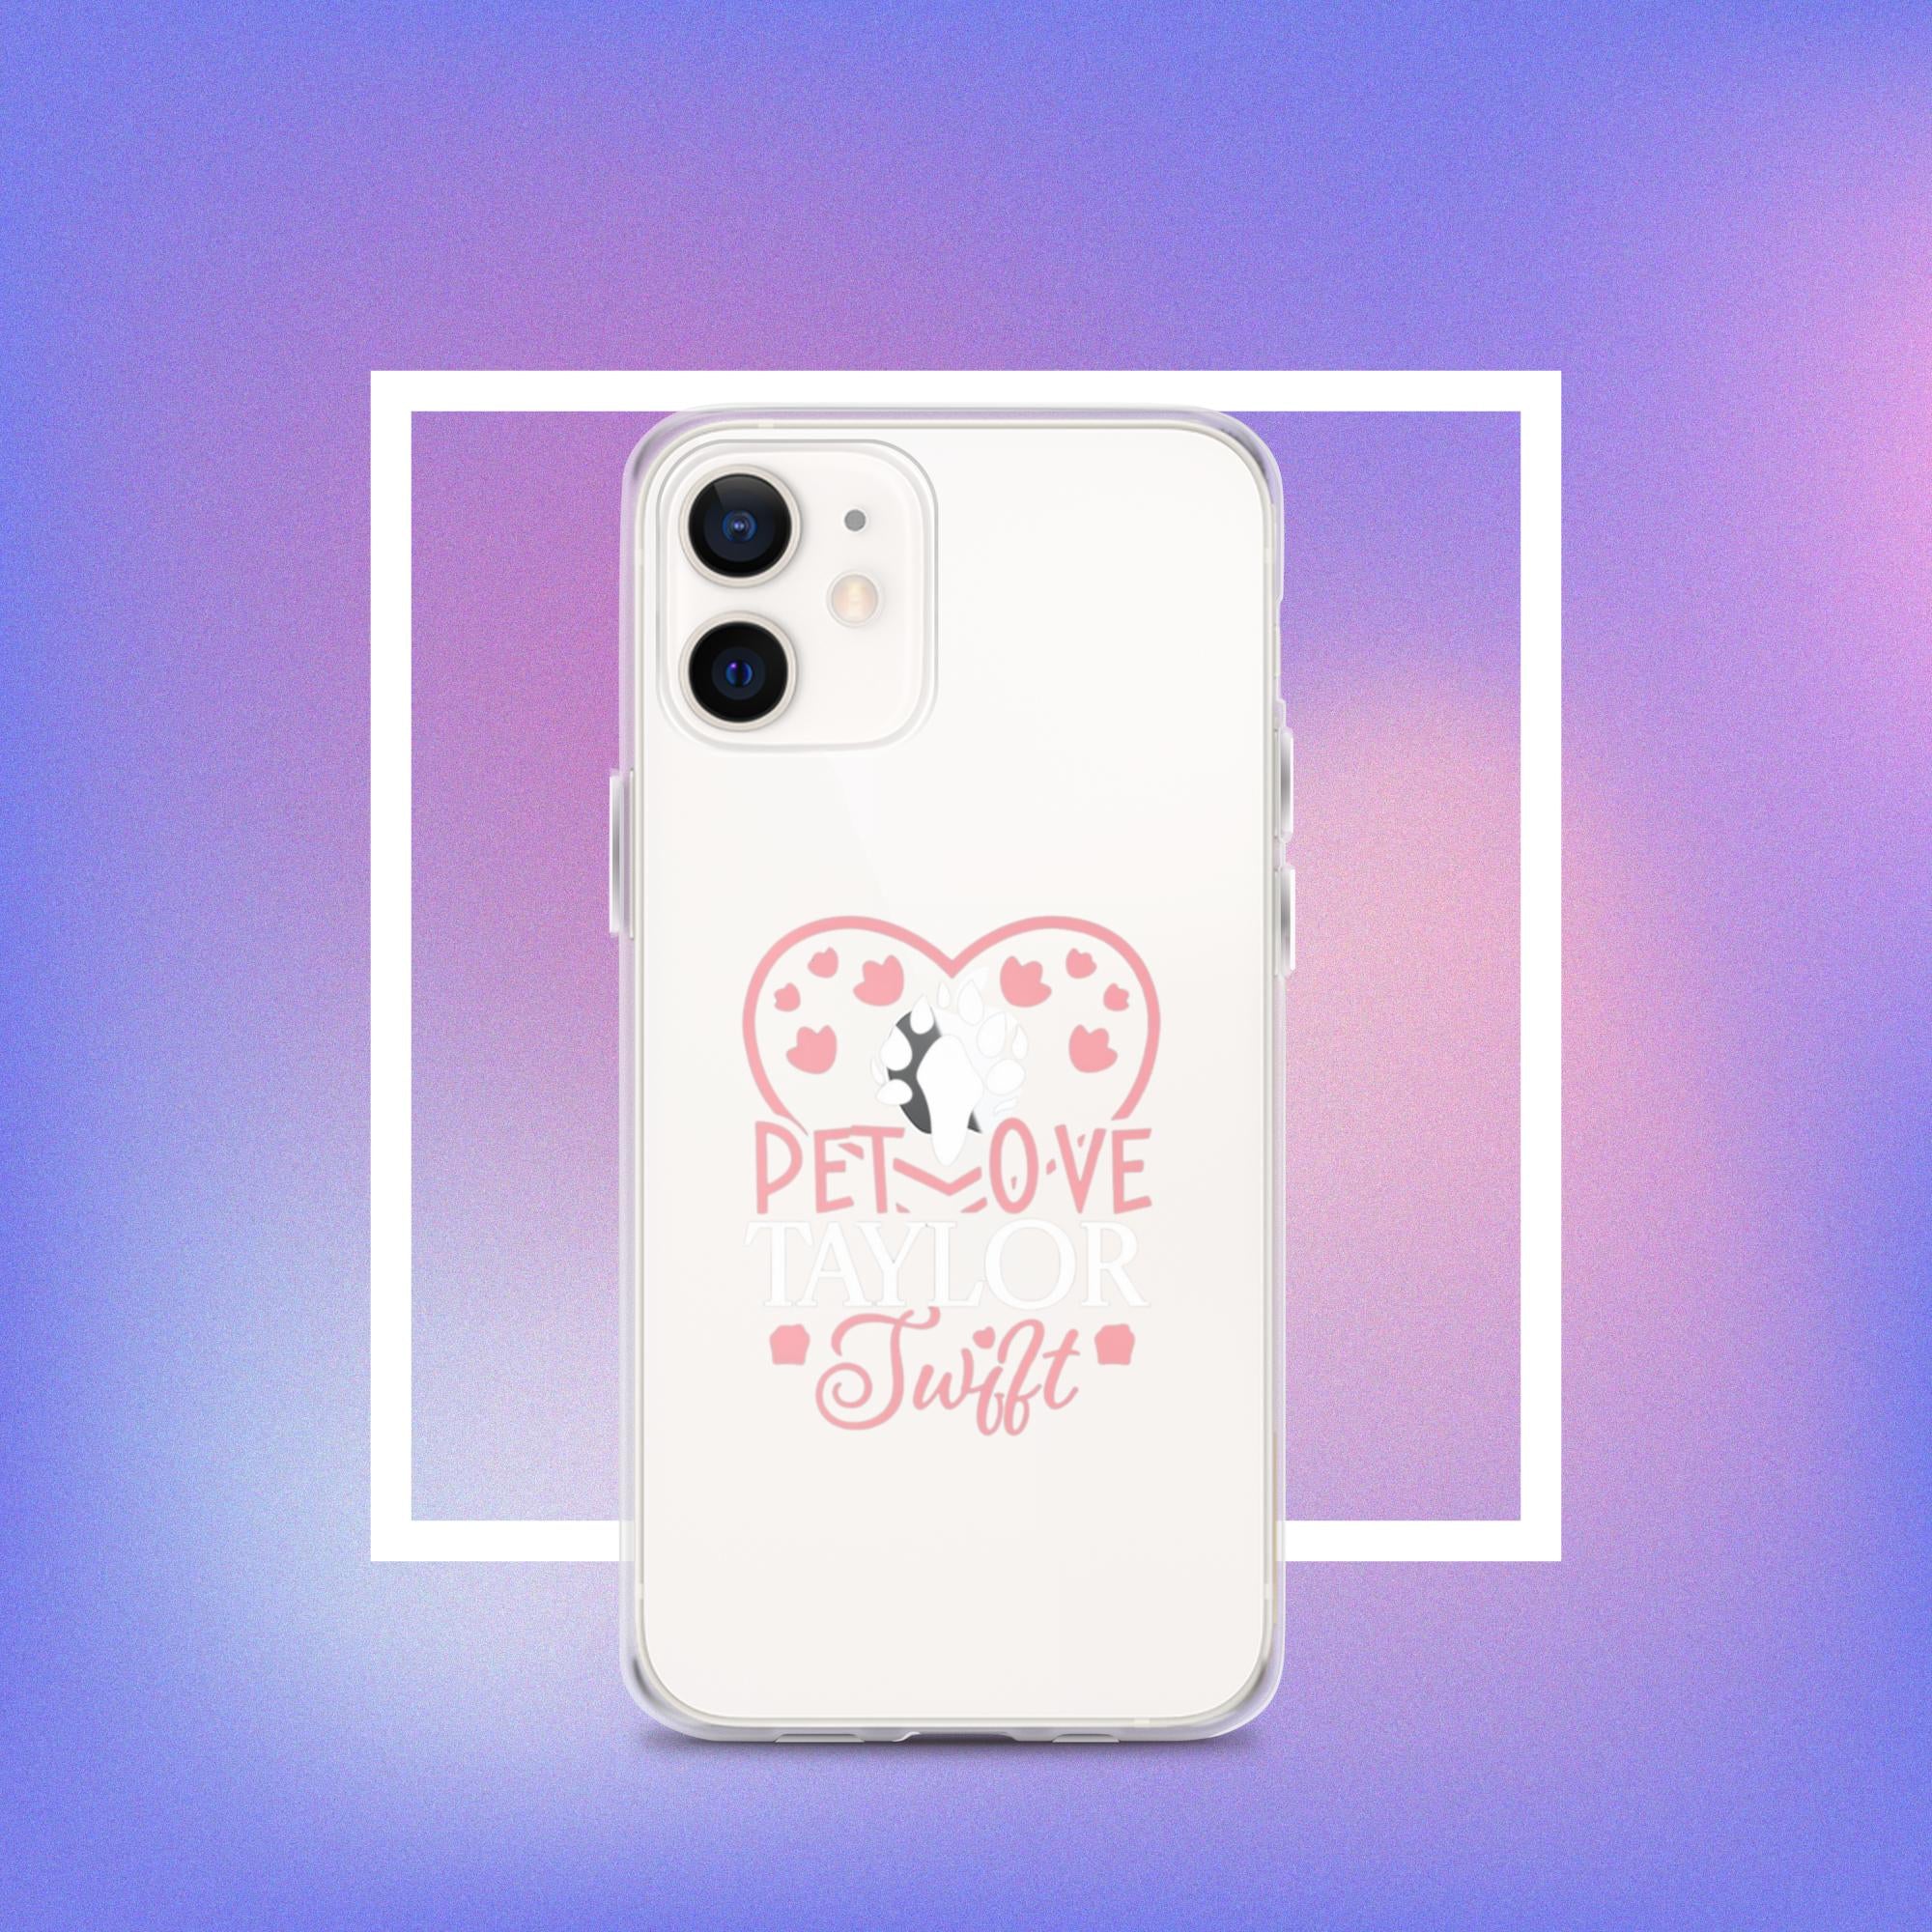 Clear Case for iPhone. A Purr-fect Blend of Pet Love and Taylor Admiration!